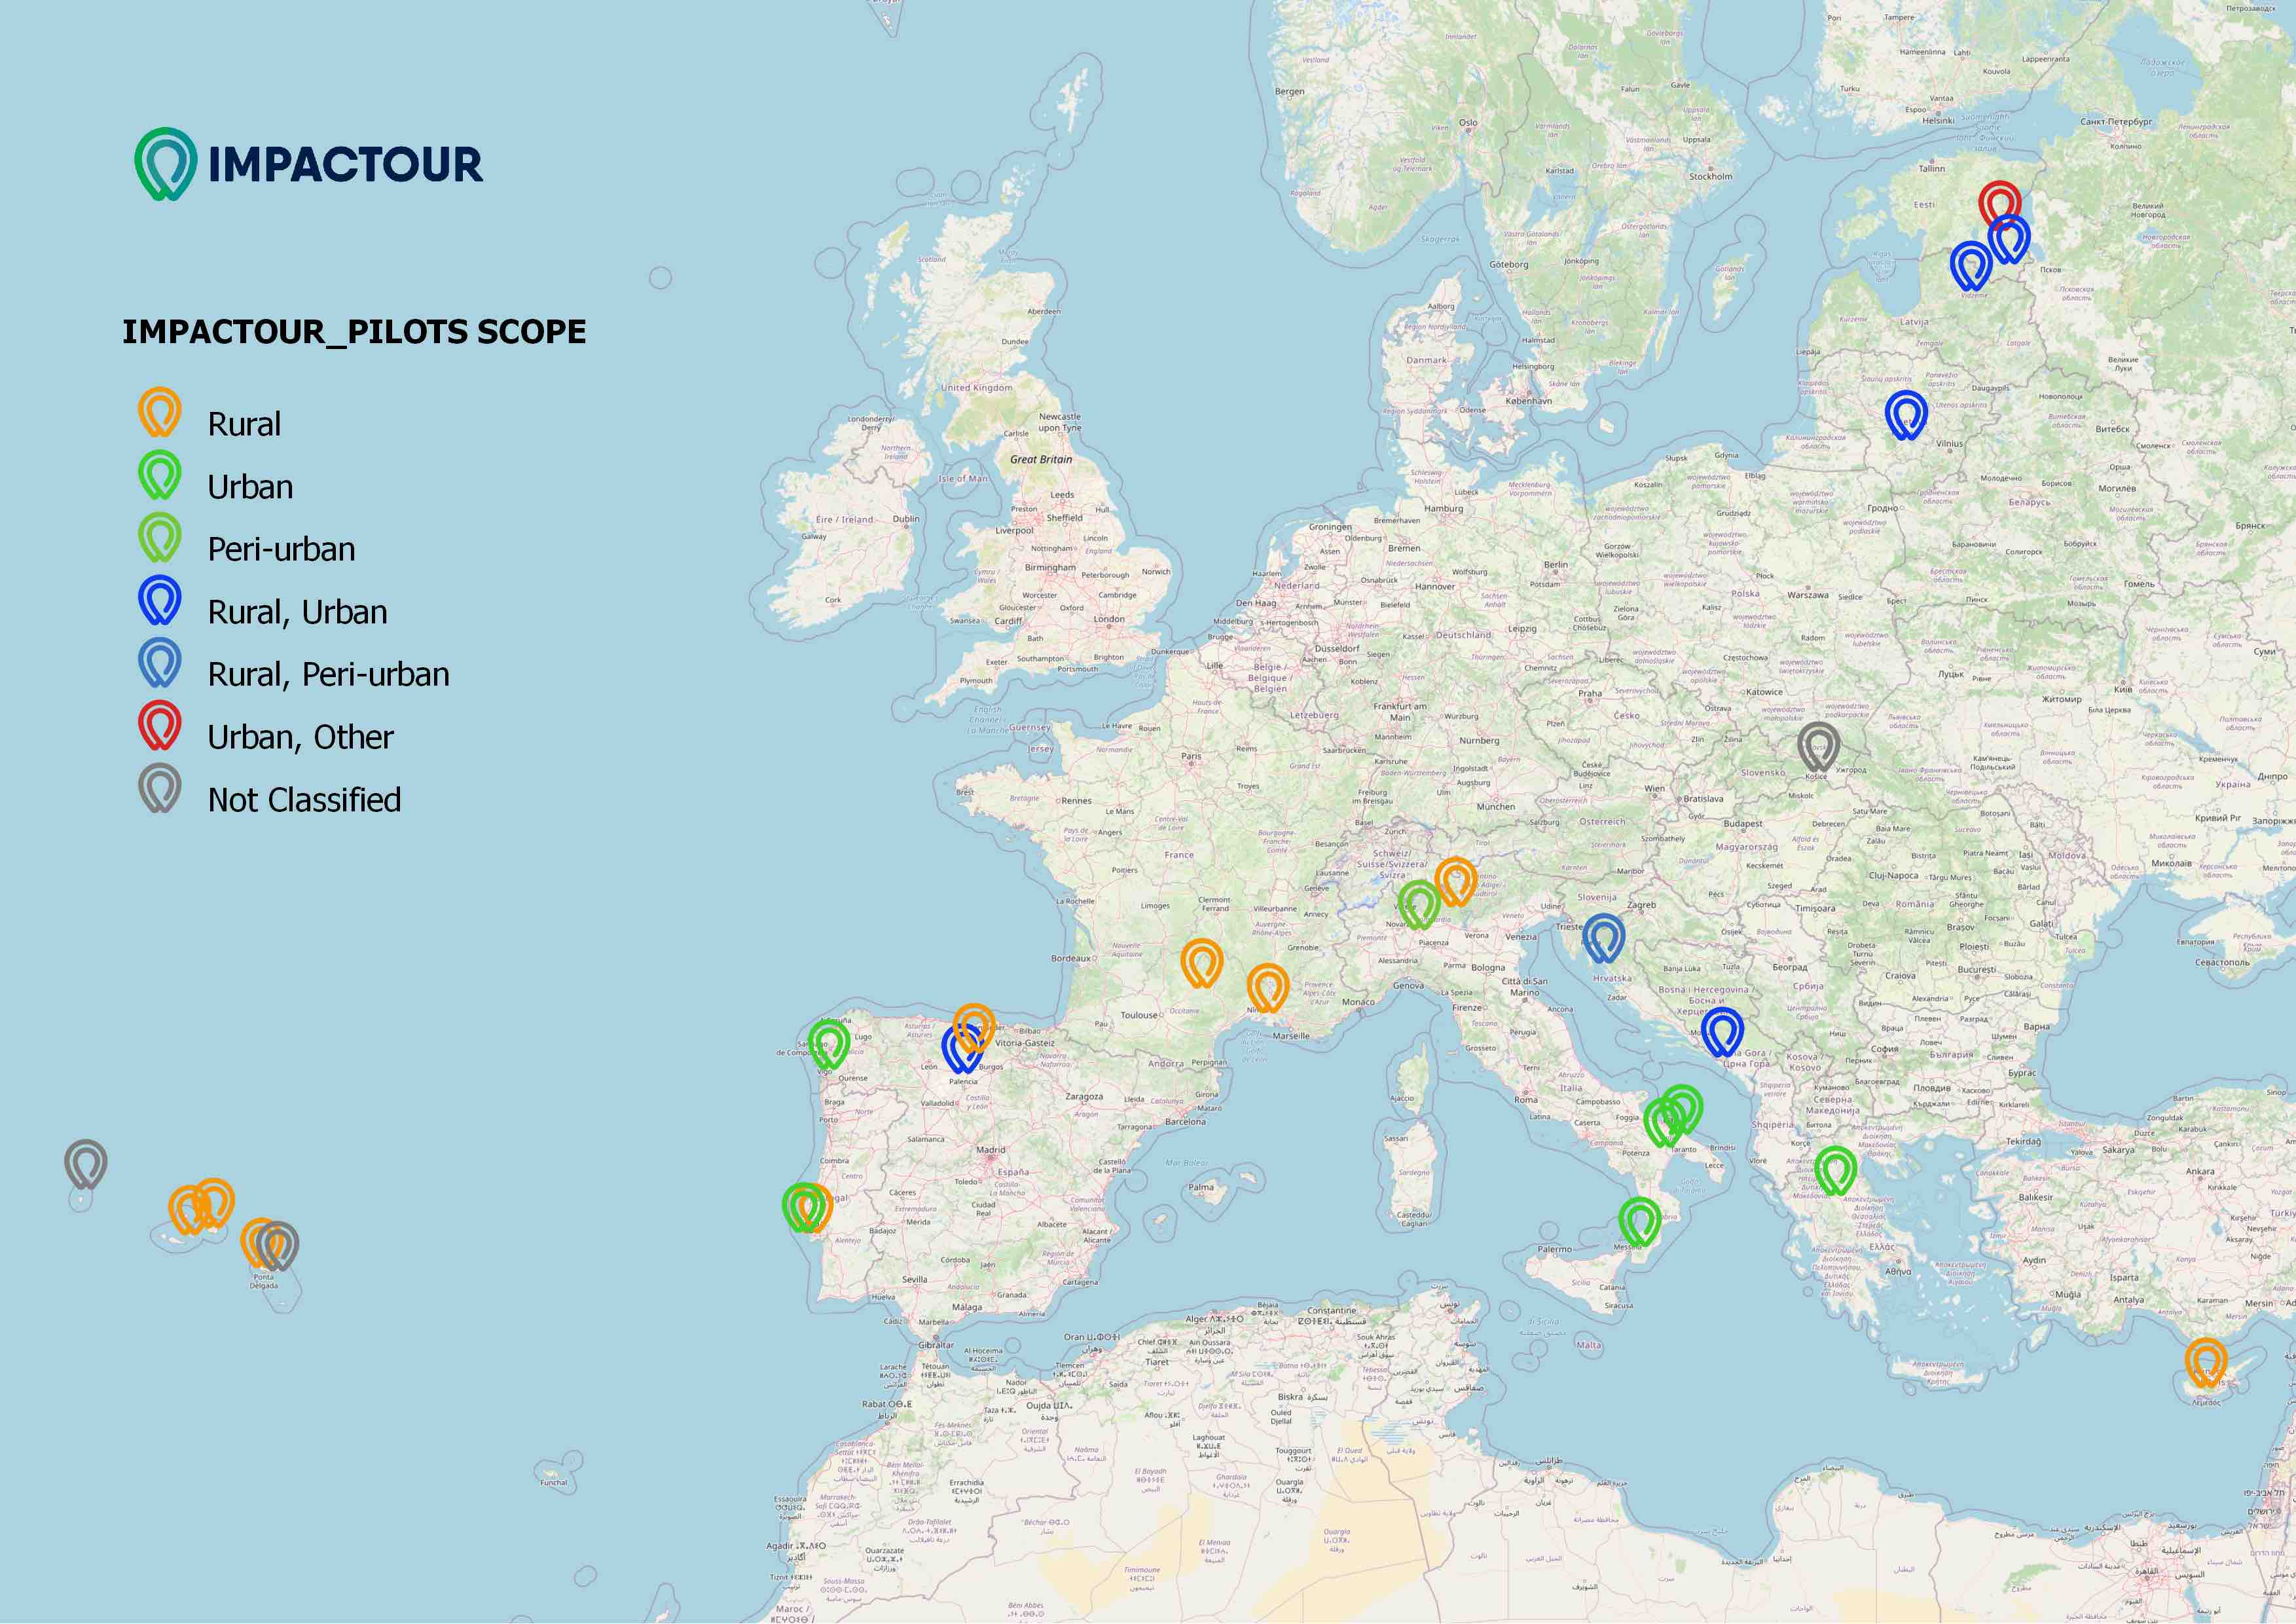 Map of Europe showing the locations of each pilot site